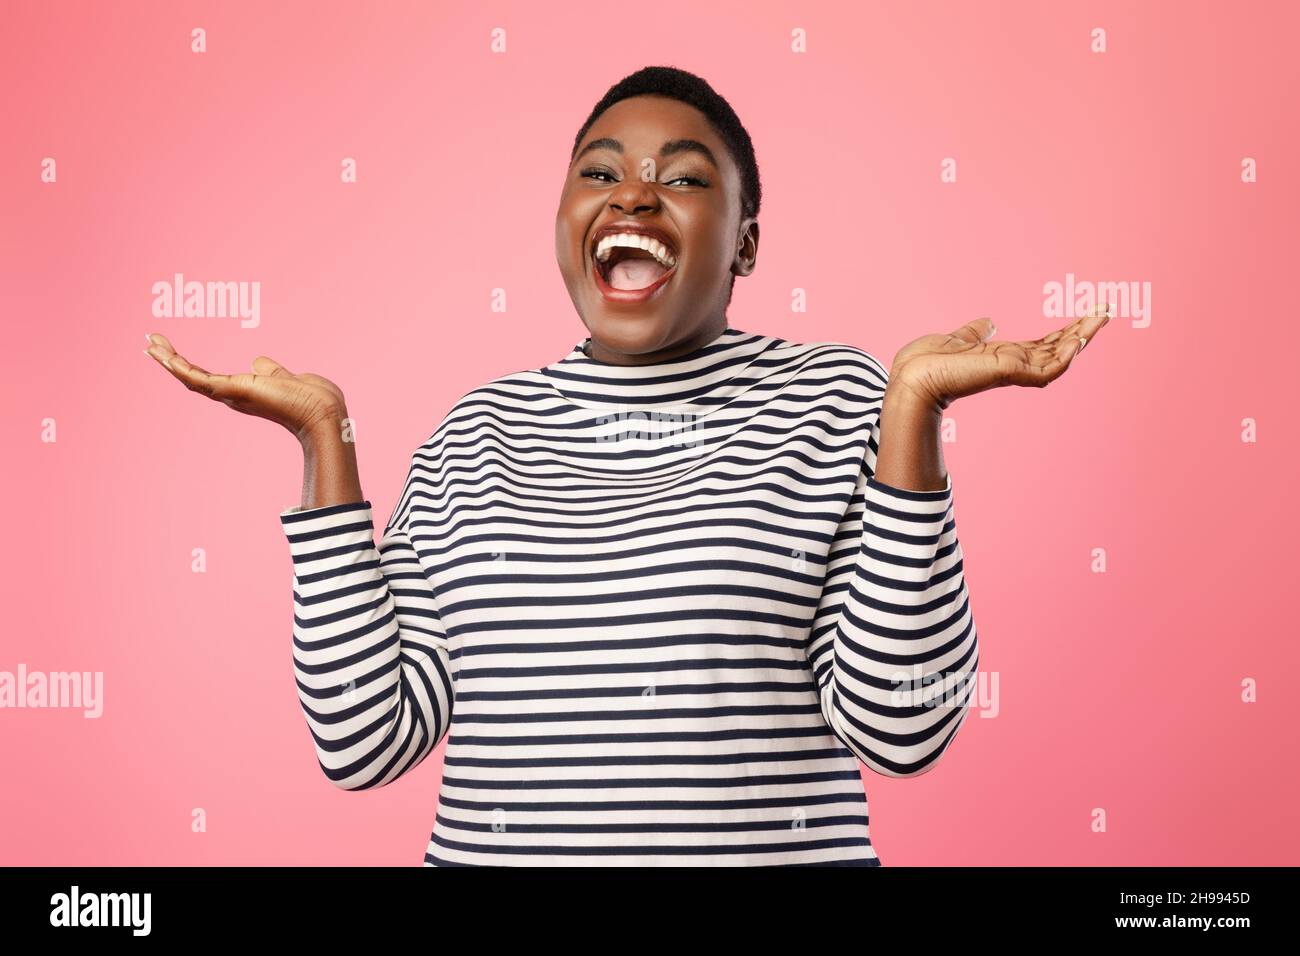 Cheerful Plus-Sized Black Lady Holding Two Invisible Objects, Pink Background Stock Photo